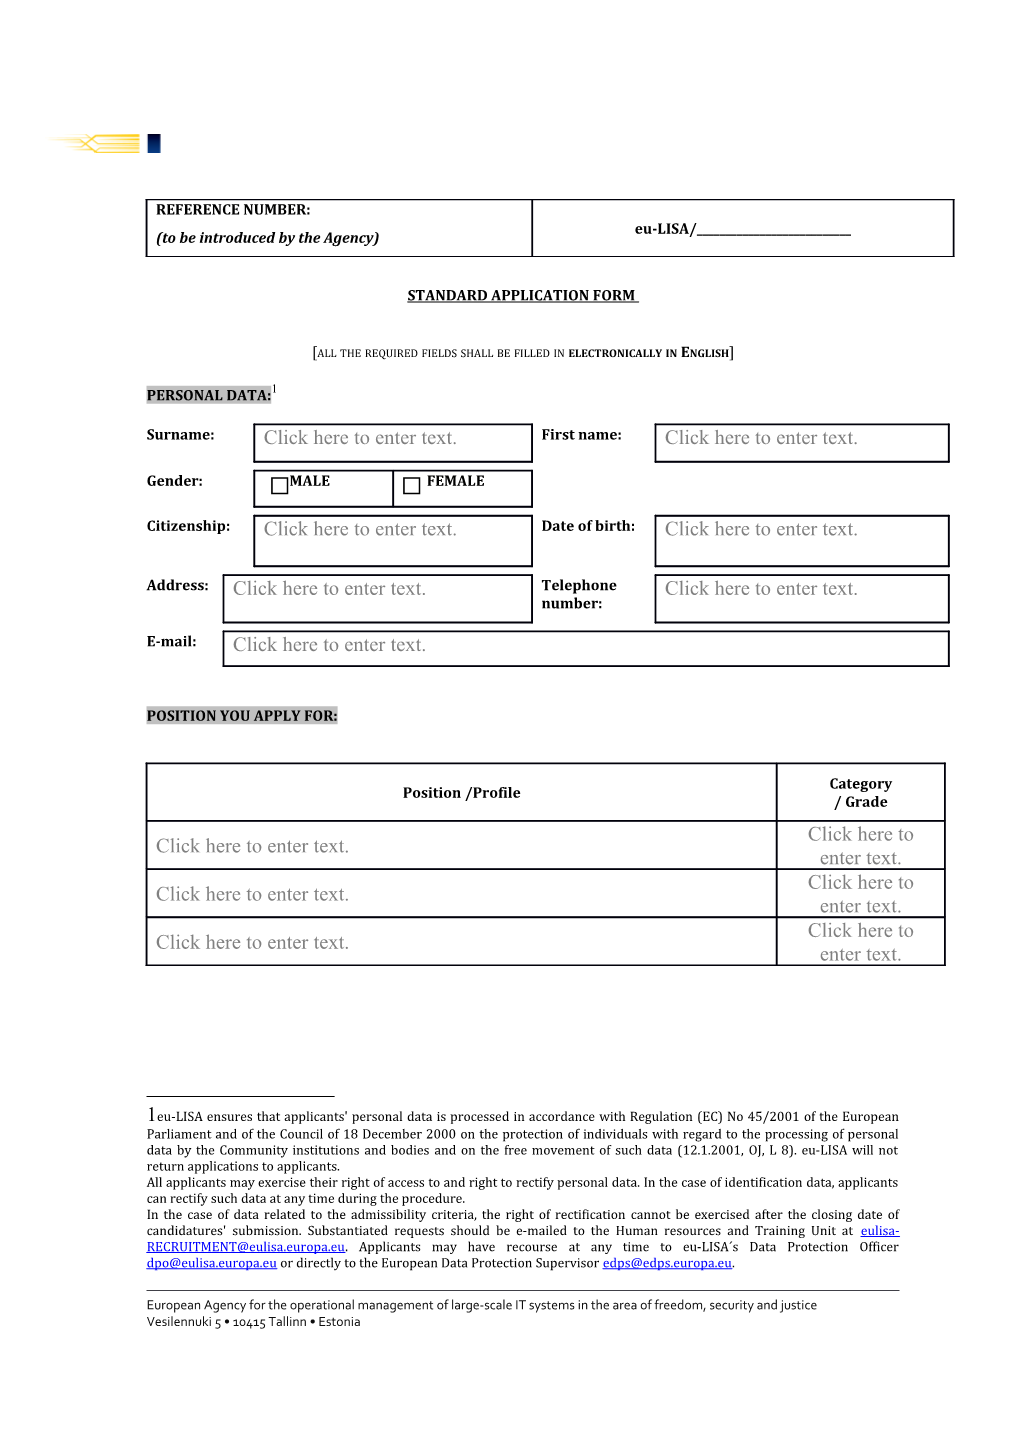 Standard Application Form (MS Word Version 2013 and Later Compatible)